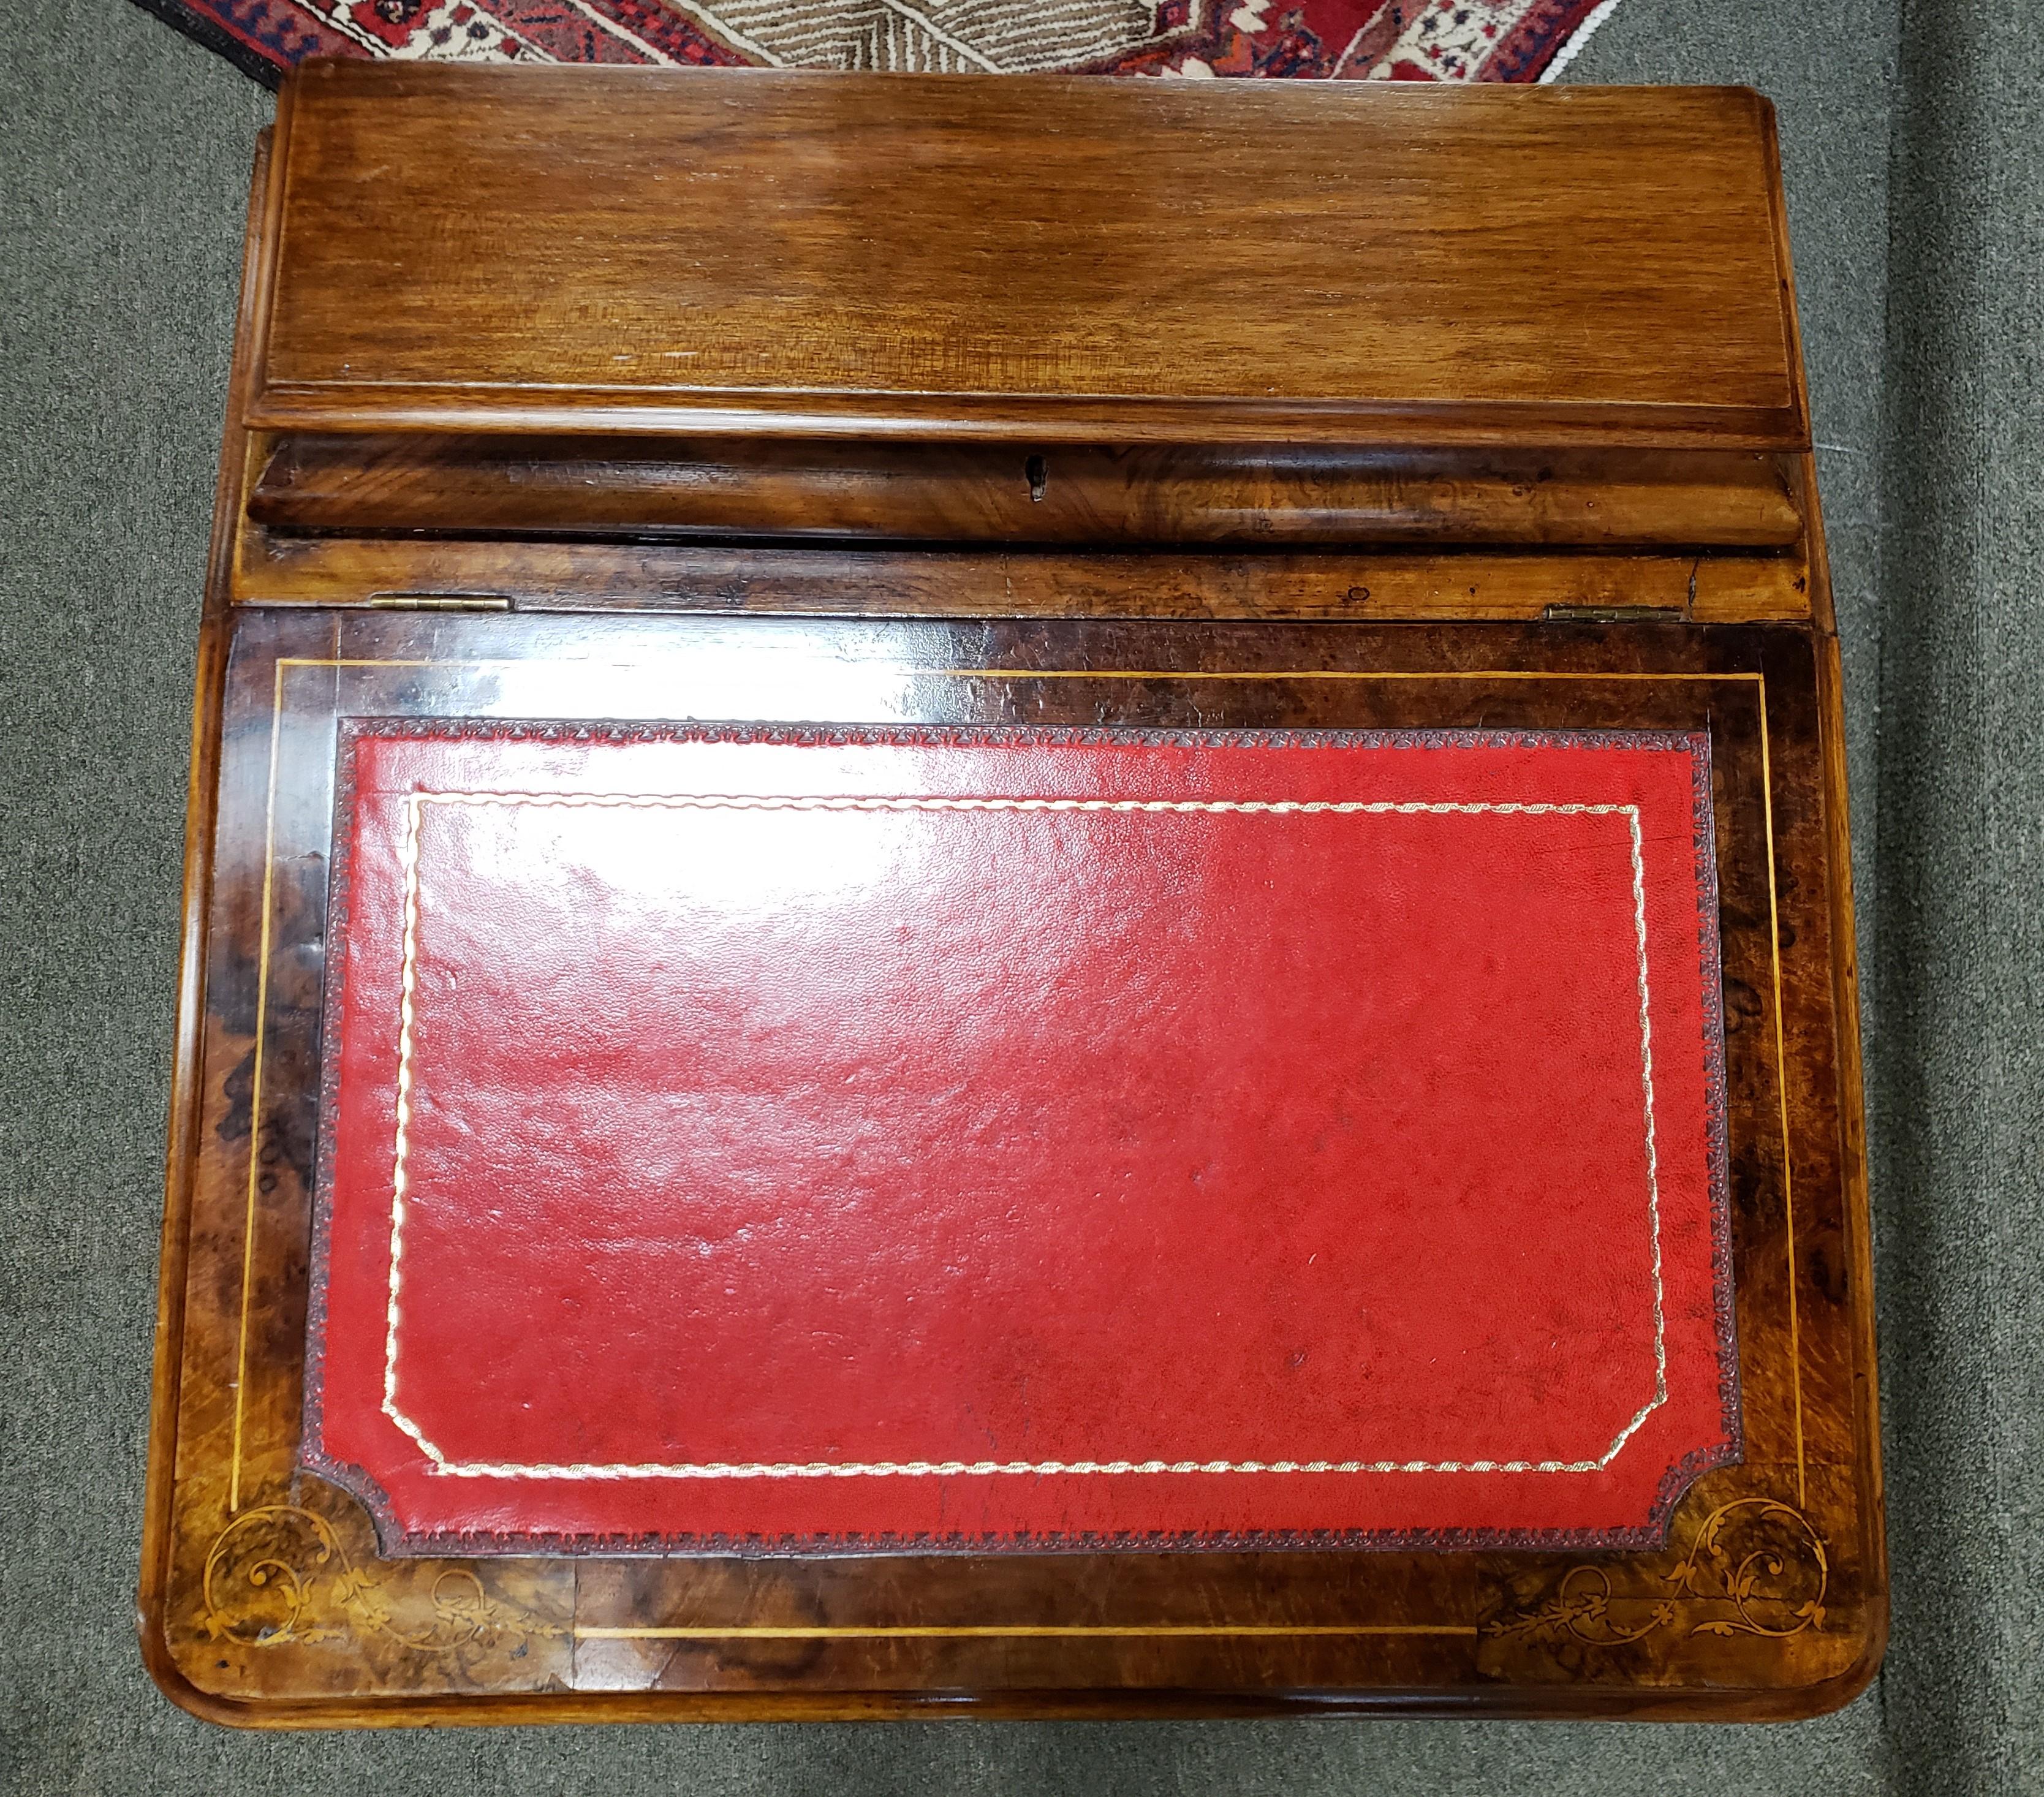 Georgian mahogany and burl walnut davenport. The top has a leather writing surface with foliate inlay surrounding it. The front is bookmatched walnut showing extensive figural detail. The sides consist of 4 drawers on the right side and 4 faux